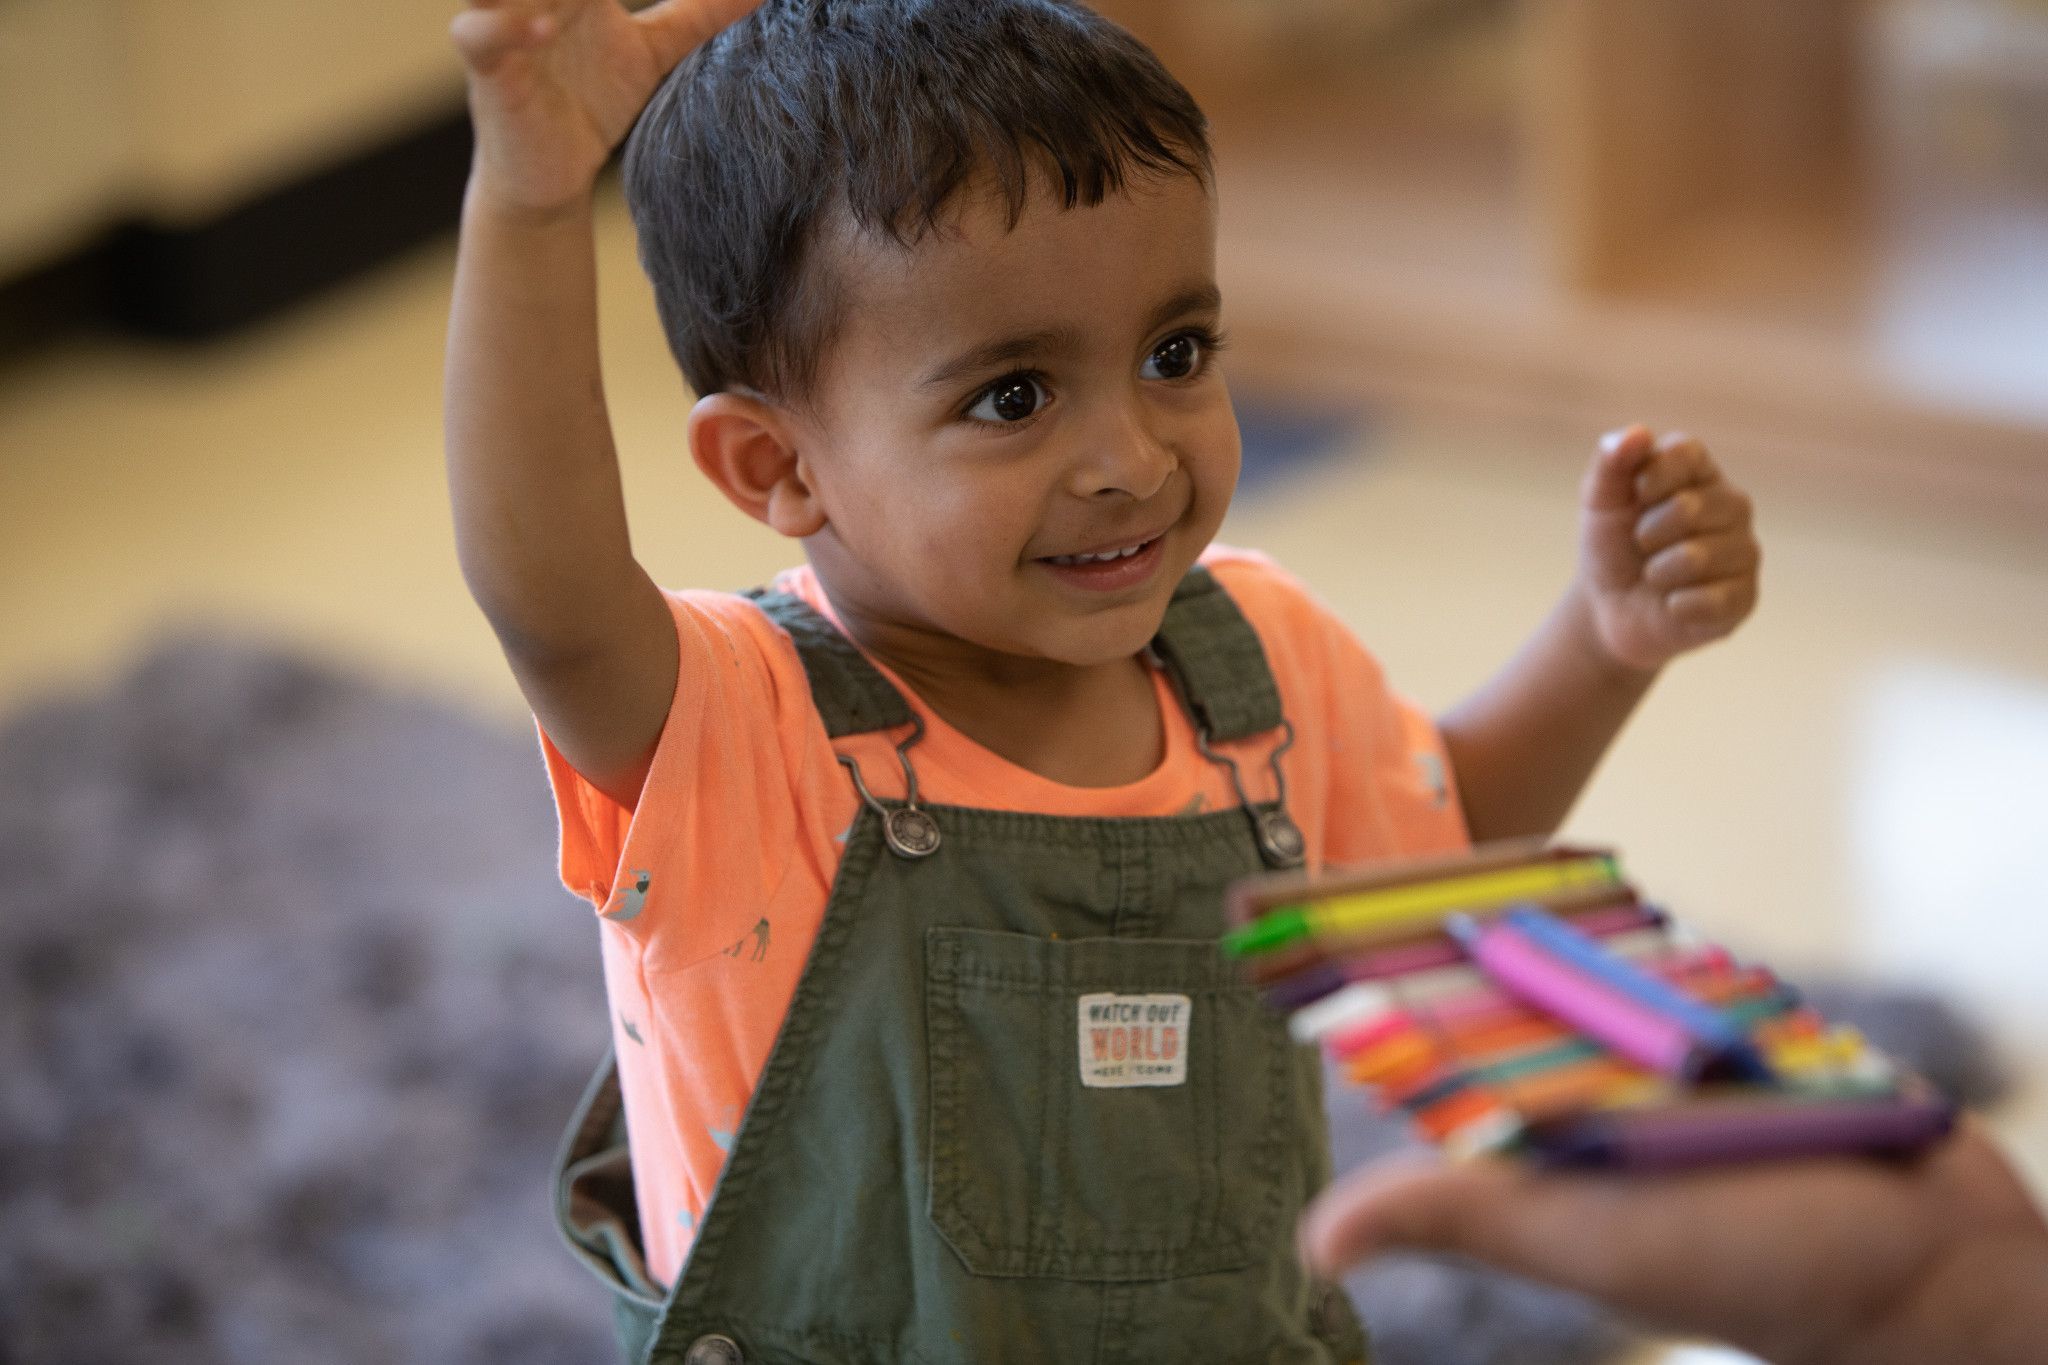 Child in overalls playing in child care center